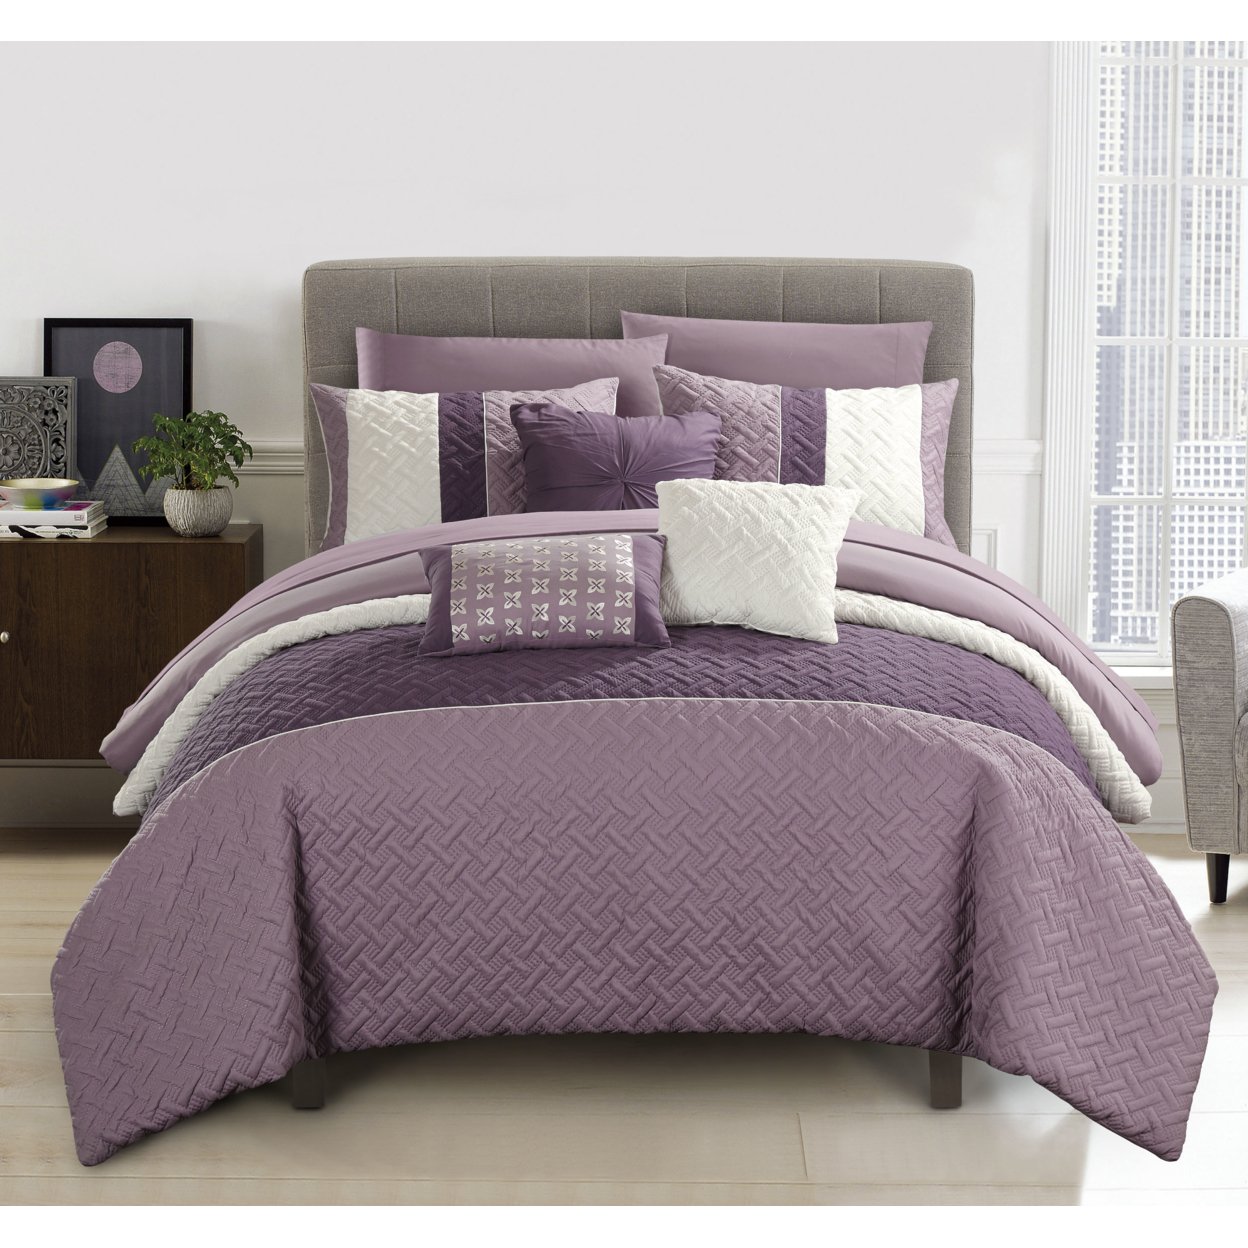 Chic Home Shaila 10 Or 8 Piece Comforter Set Color Block Quilted Embroidered Design Bed In A Bag Bedding - Plum, Twin